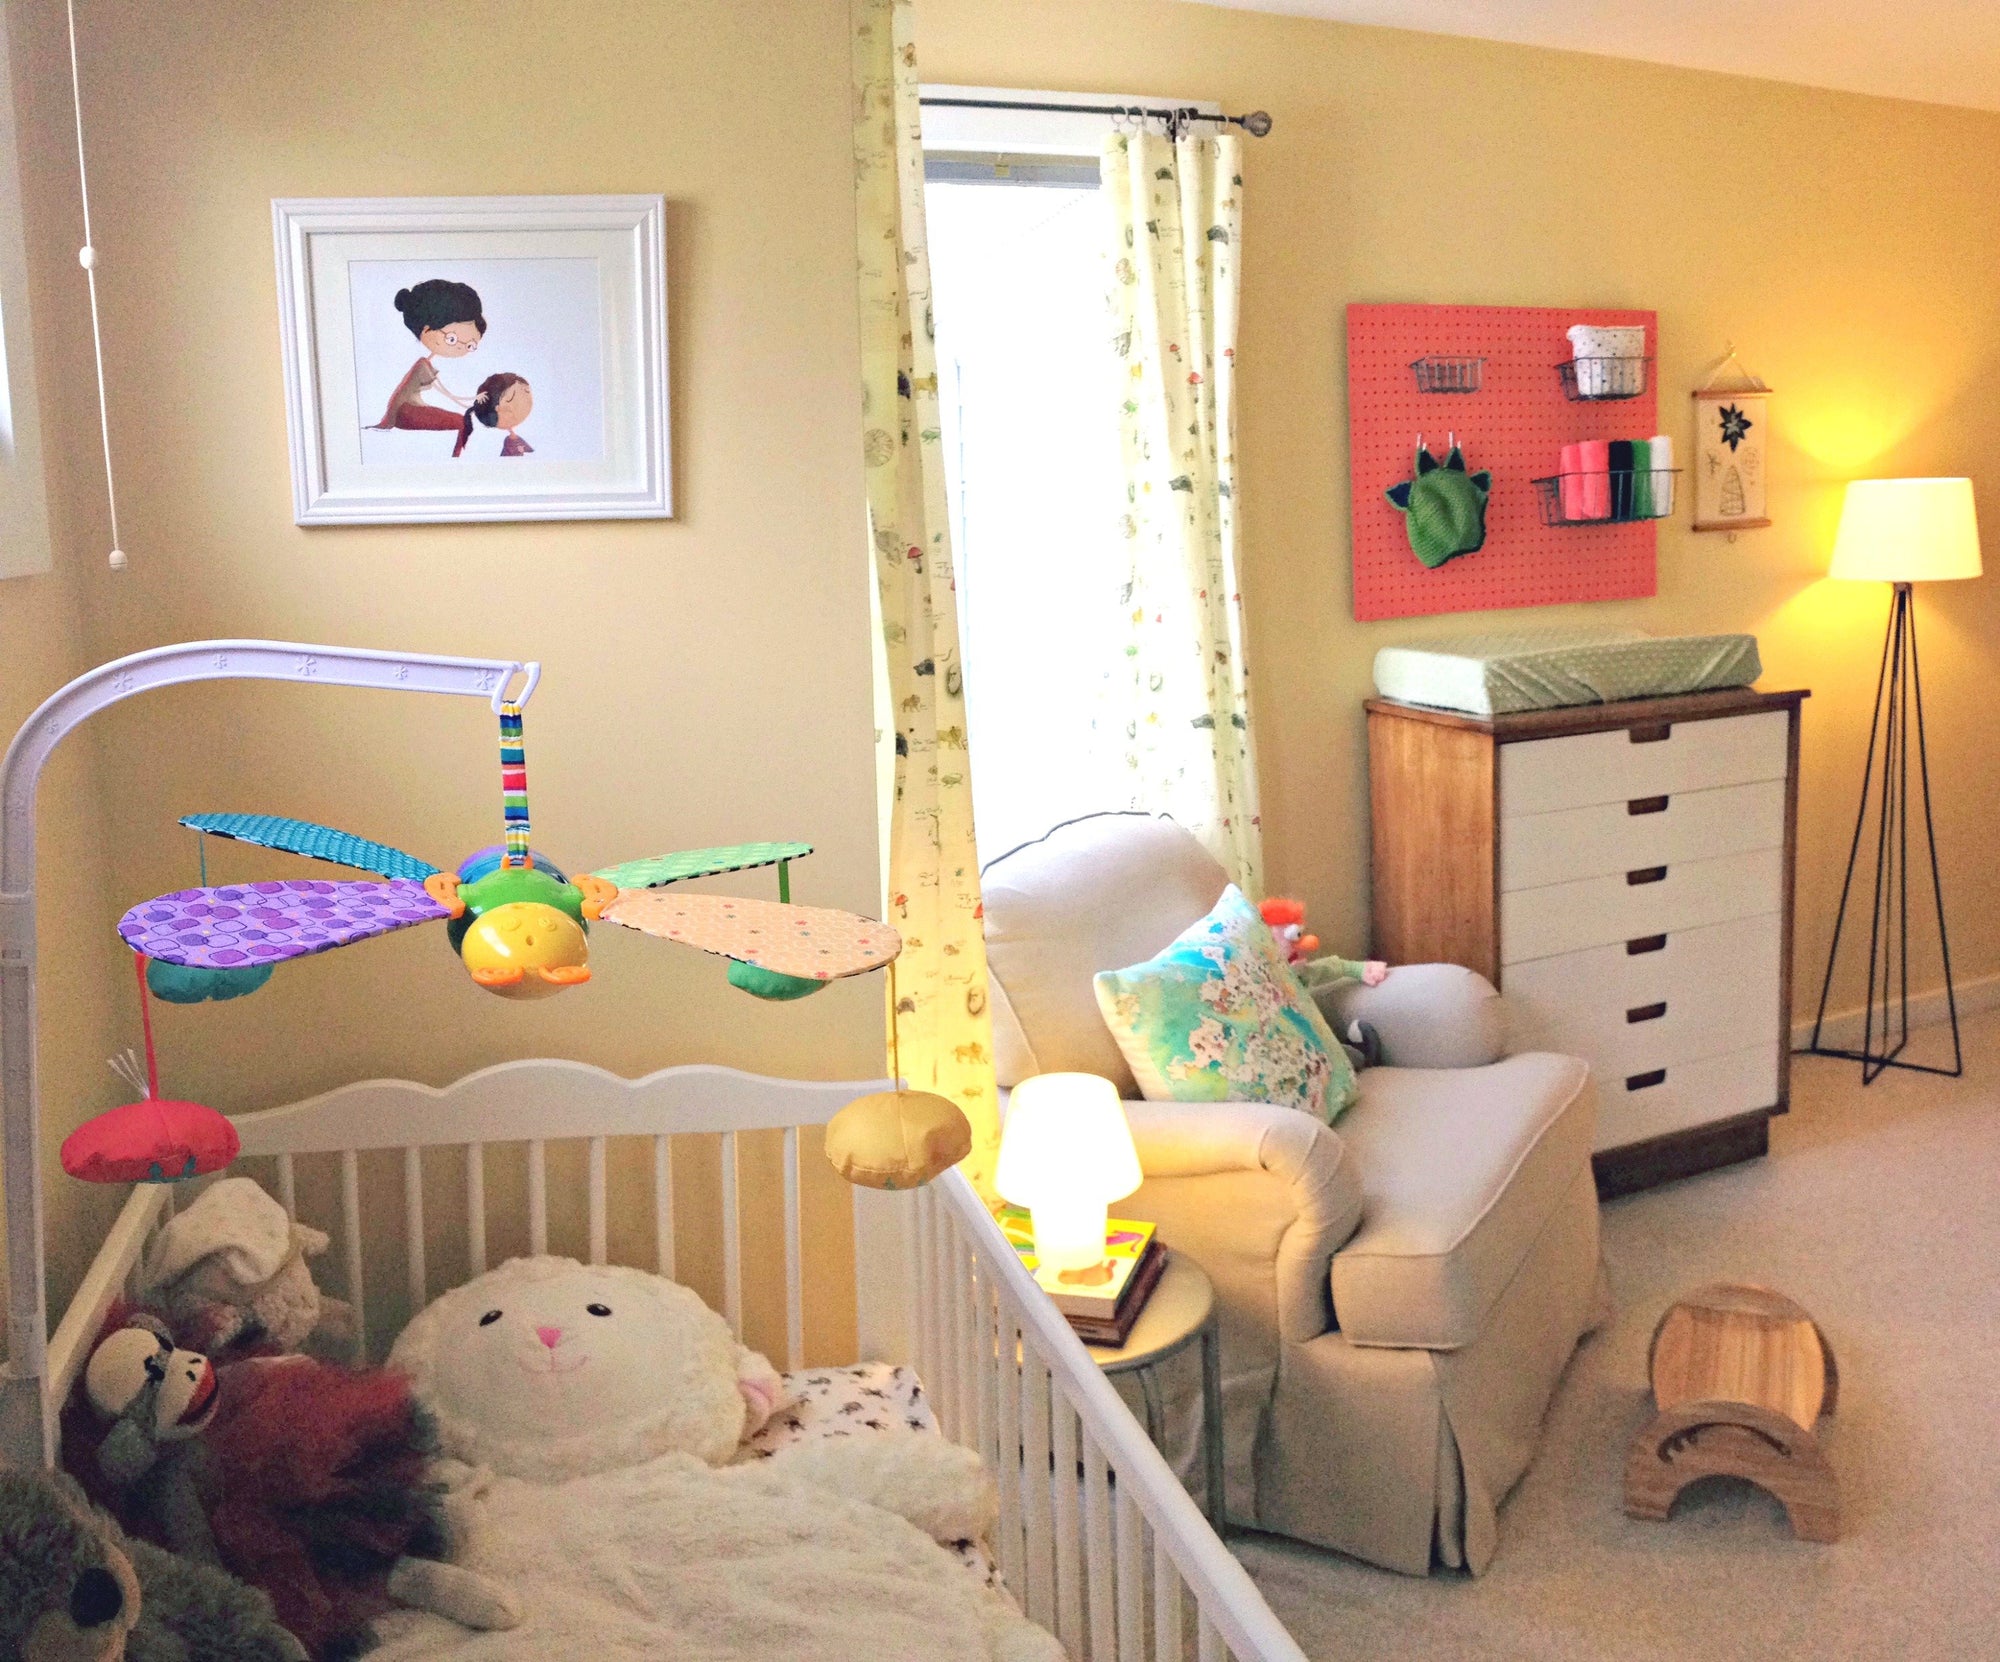 Mad Scientist Nursery Before and After Edition!